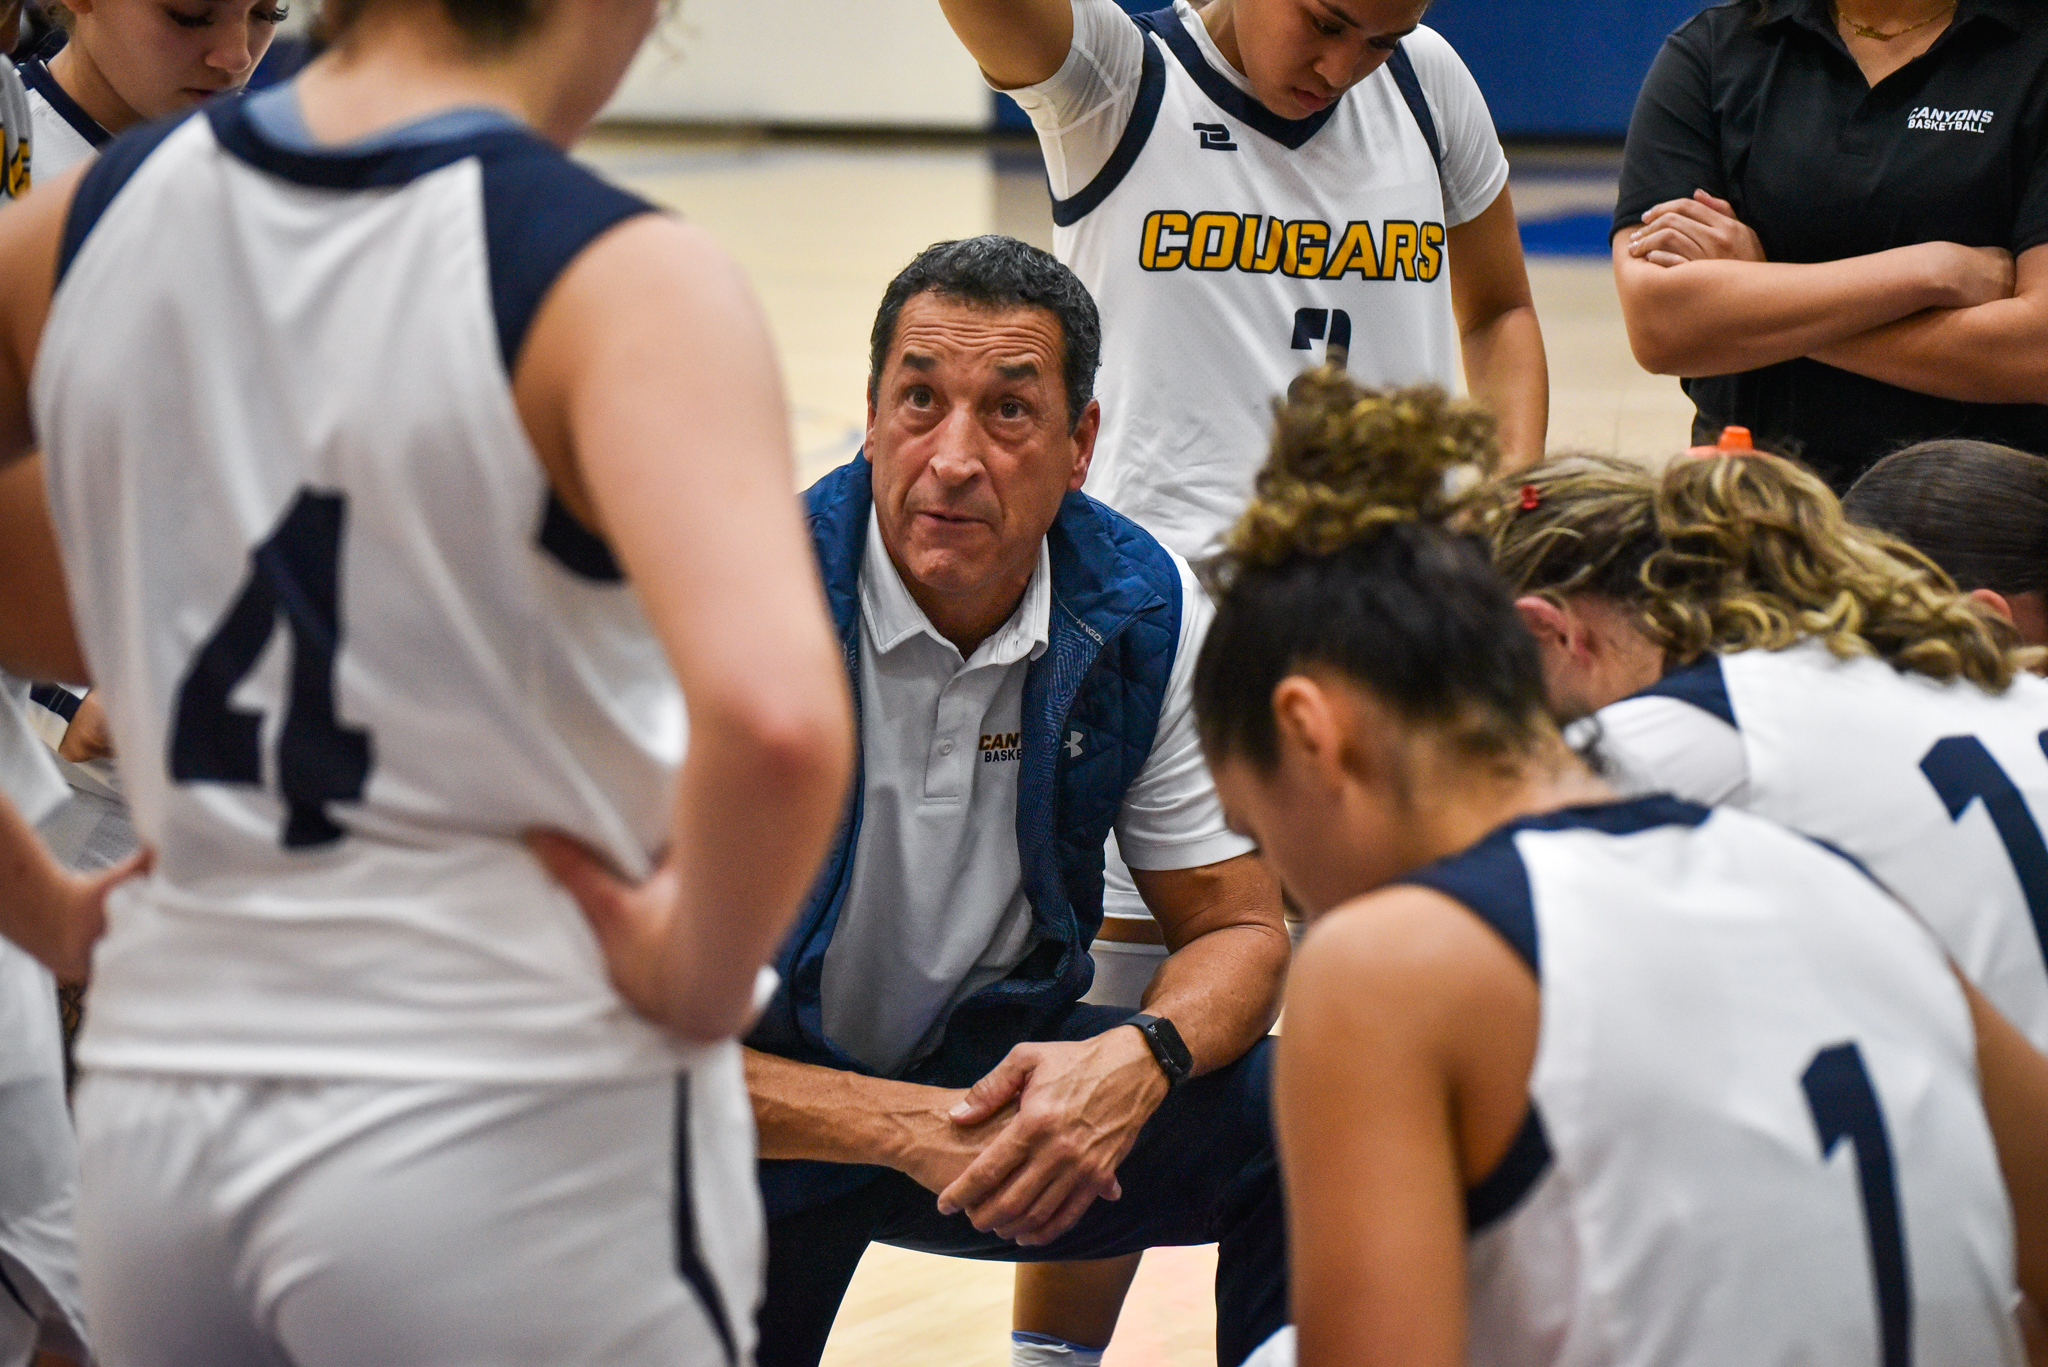 College of the Canyons women's basketball stock image.